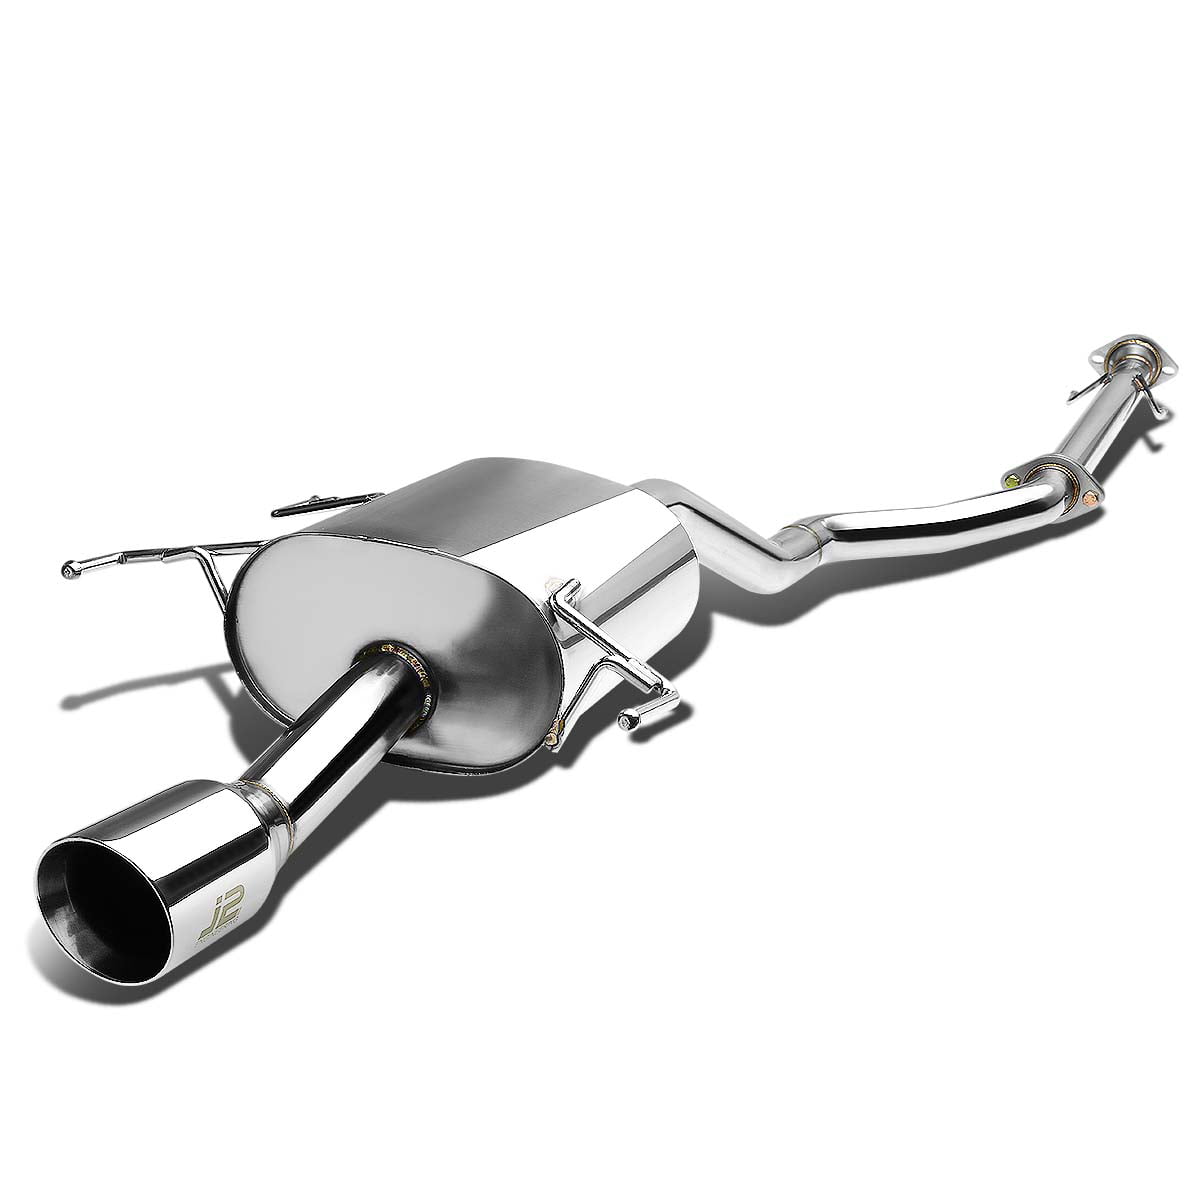 J2 Engineering J2-CBE-OS-076 Stainless Steel Catback Exhaust System 